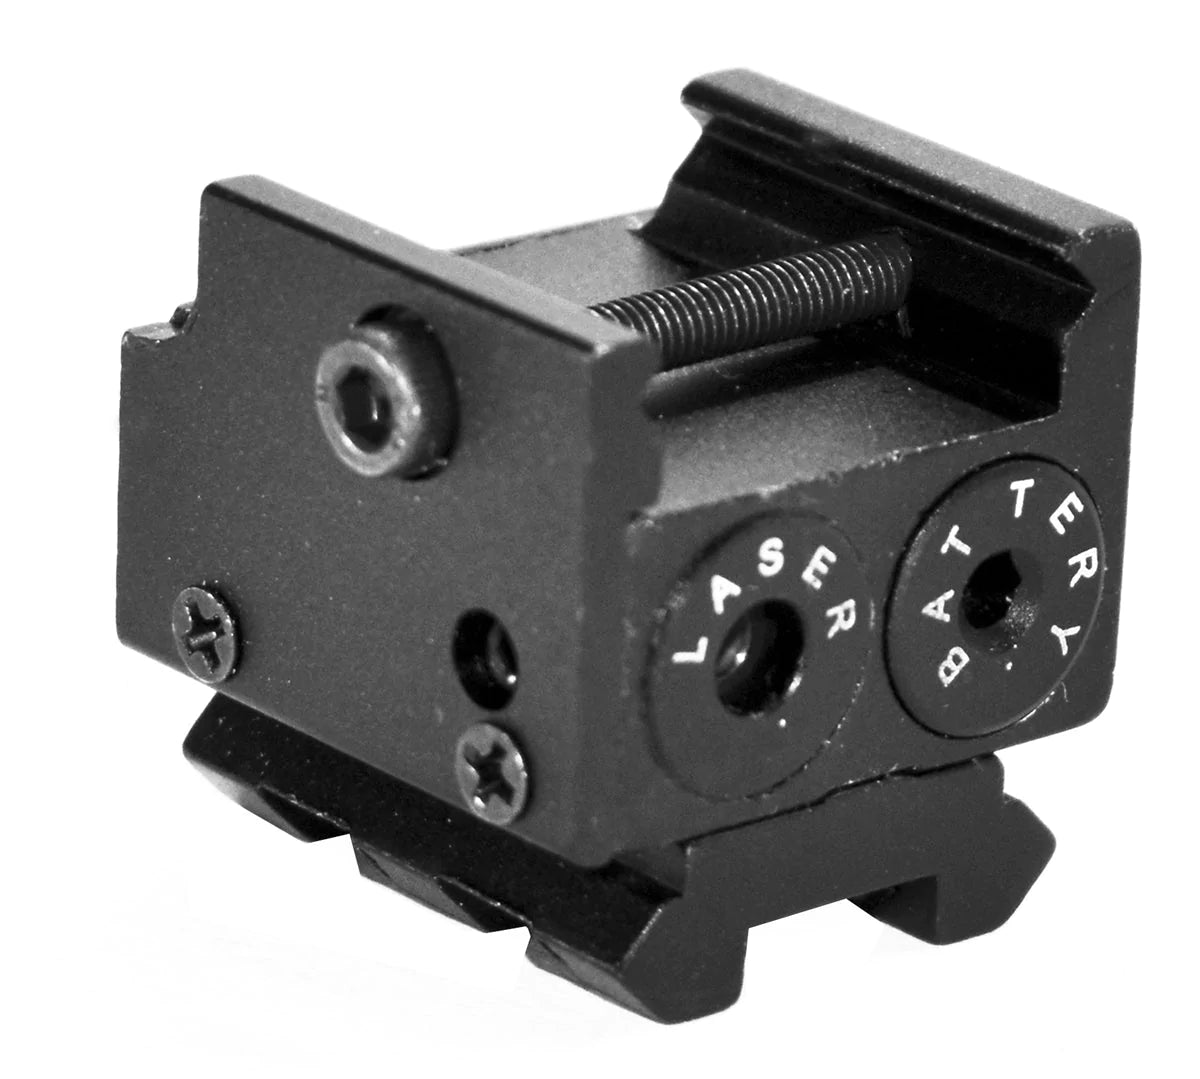 Trinity Compact red dot Sight for sig sauer p229 Tactical Optics Home Defense Accessory Picatinny Weaver Mount Adapter Aluminum Black.